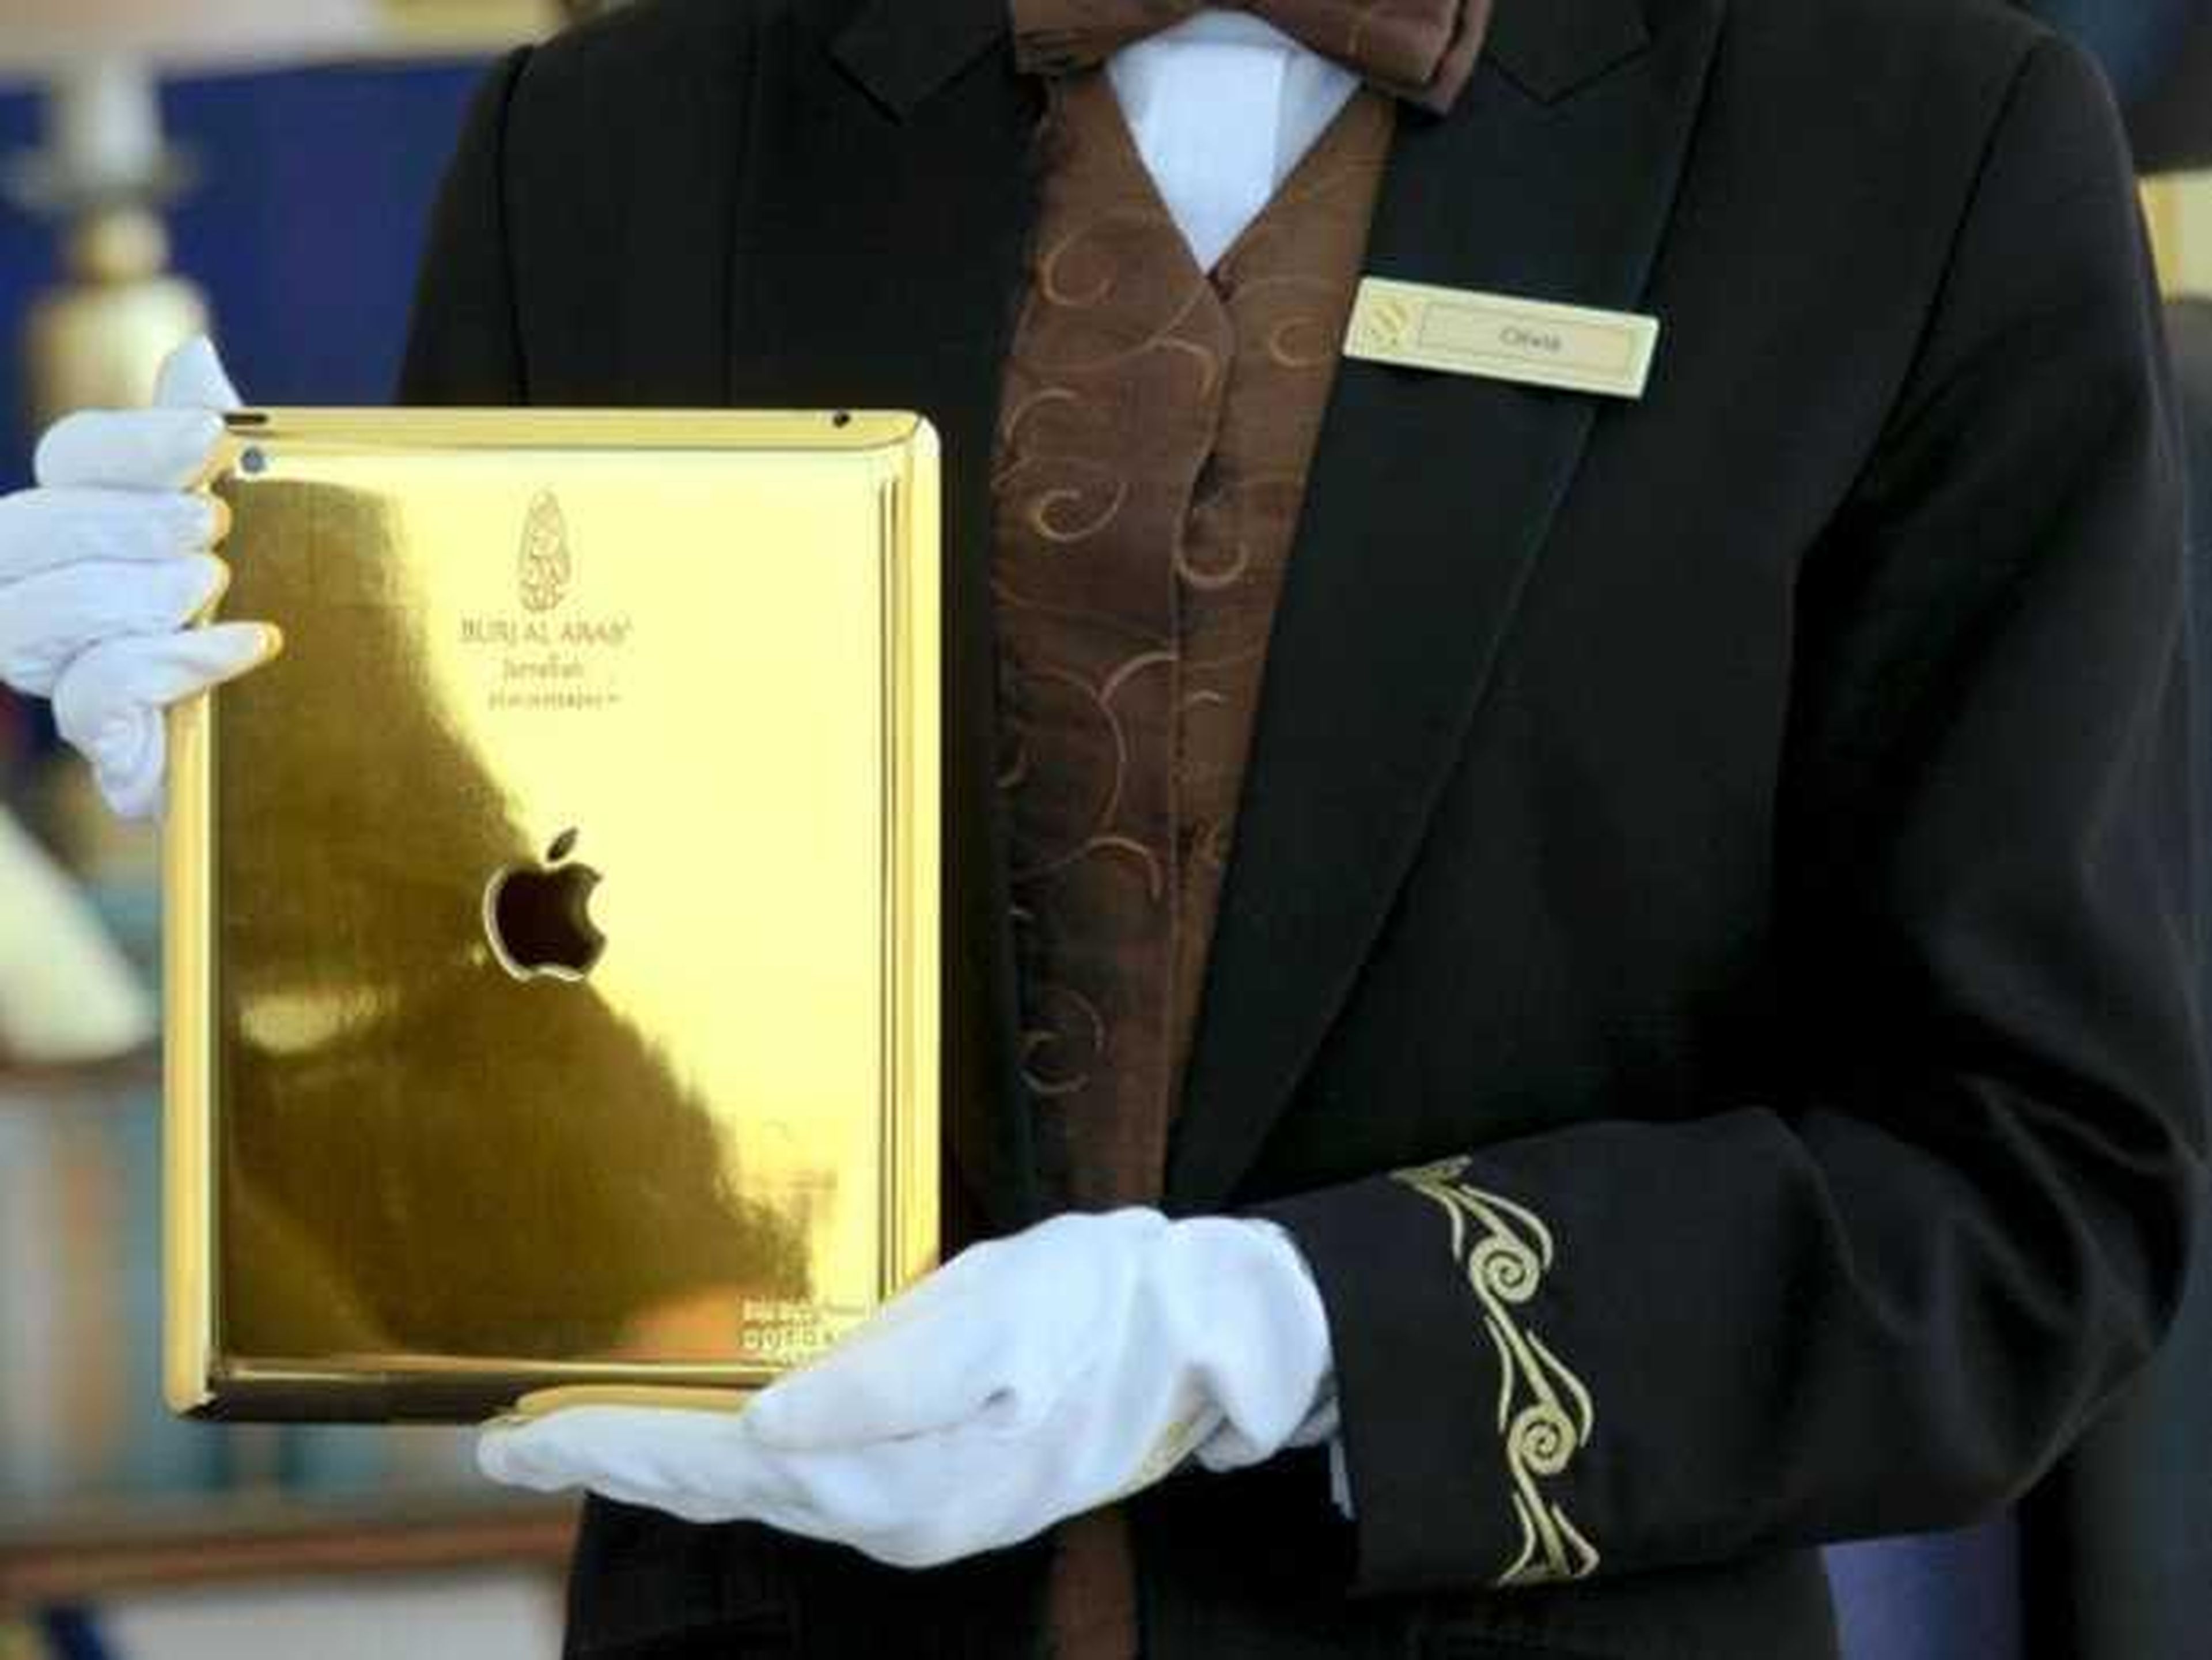 10. Guests receive a 14-karat gold iPad to use during their stay.